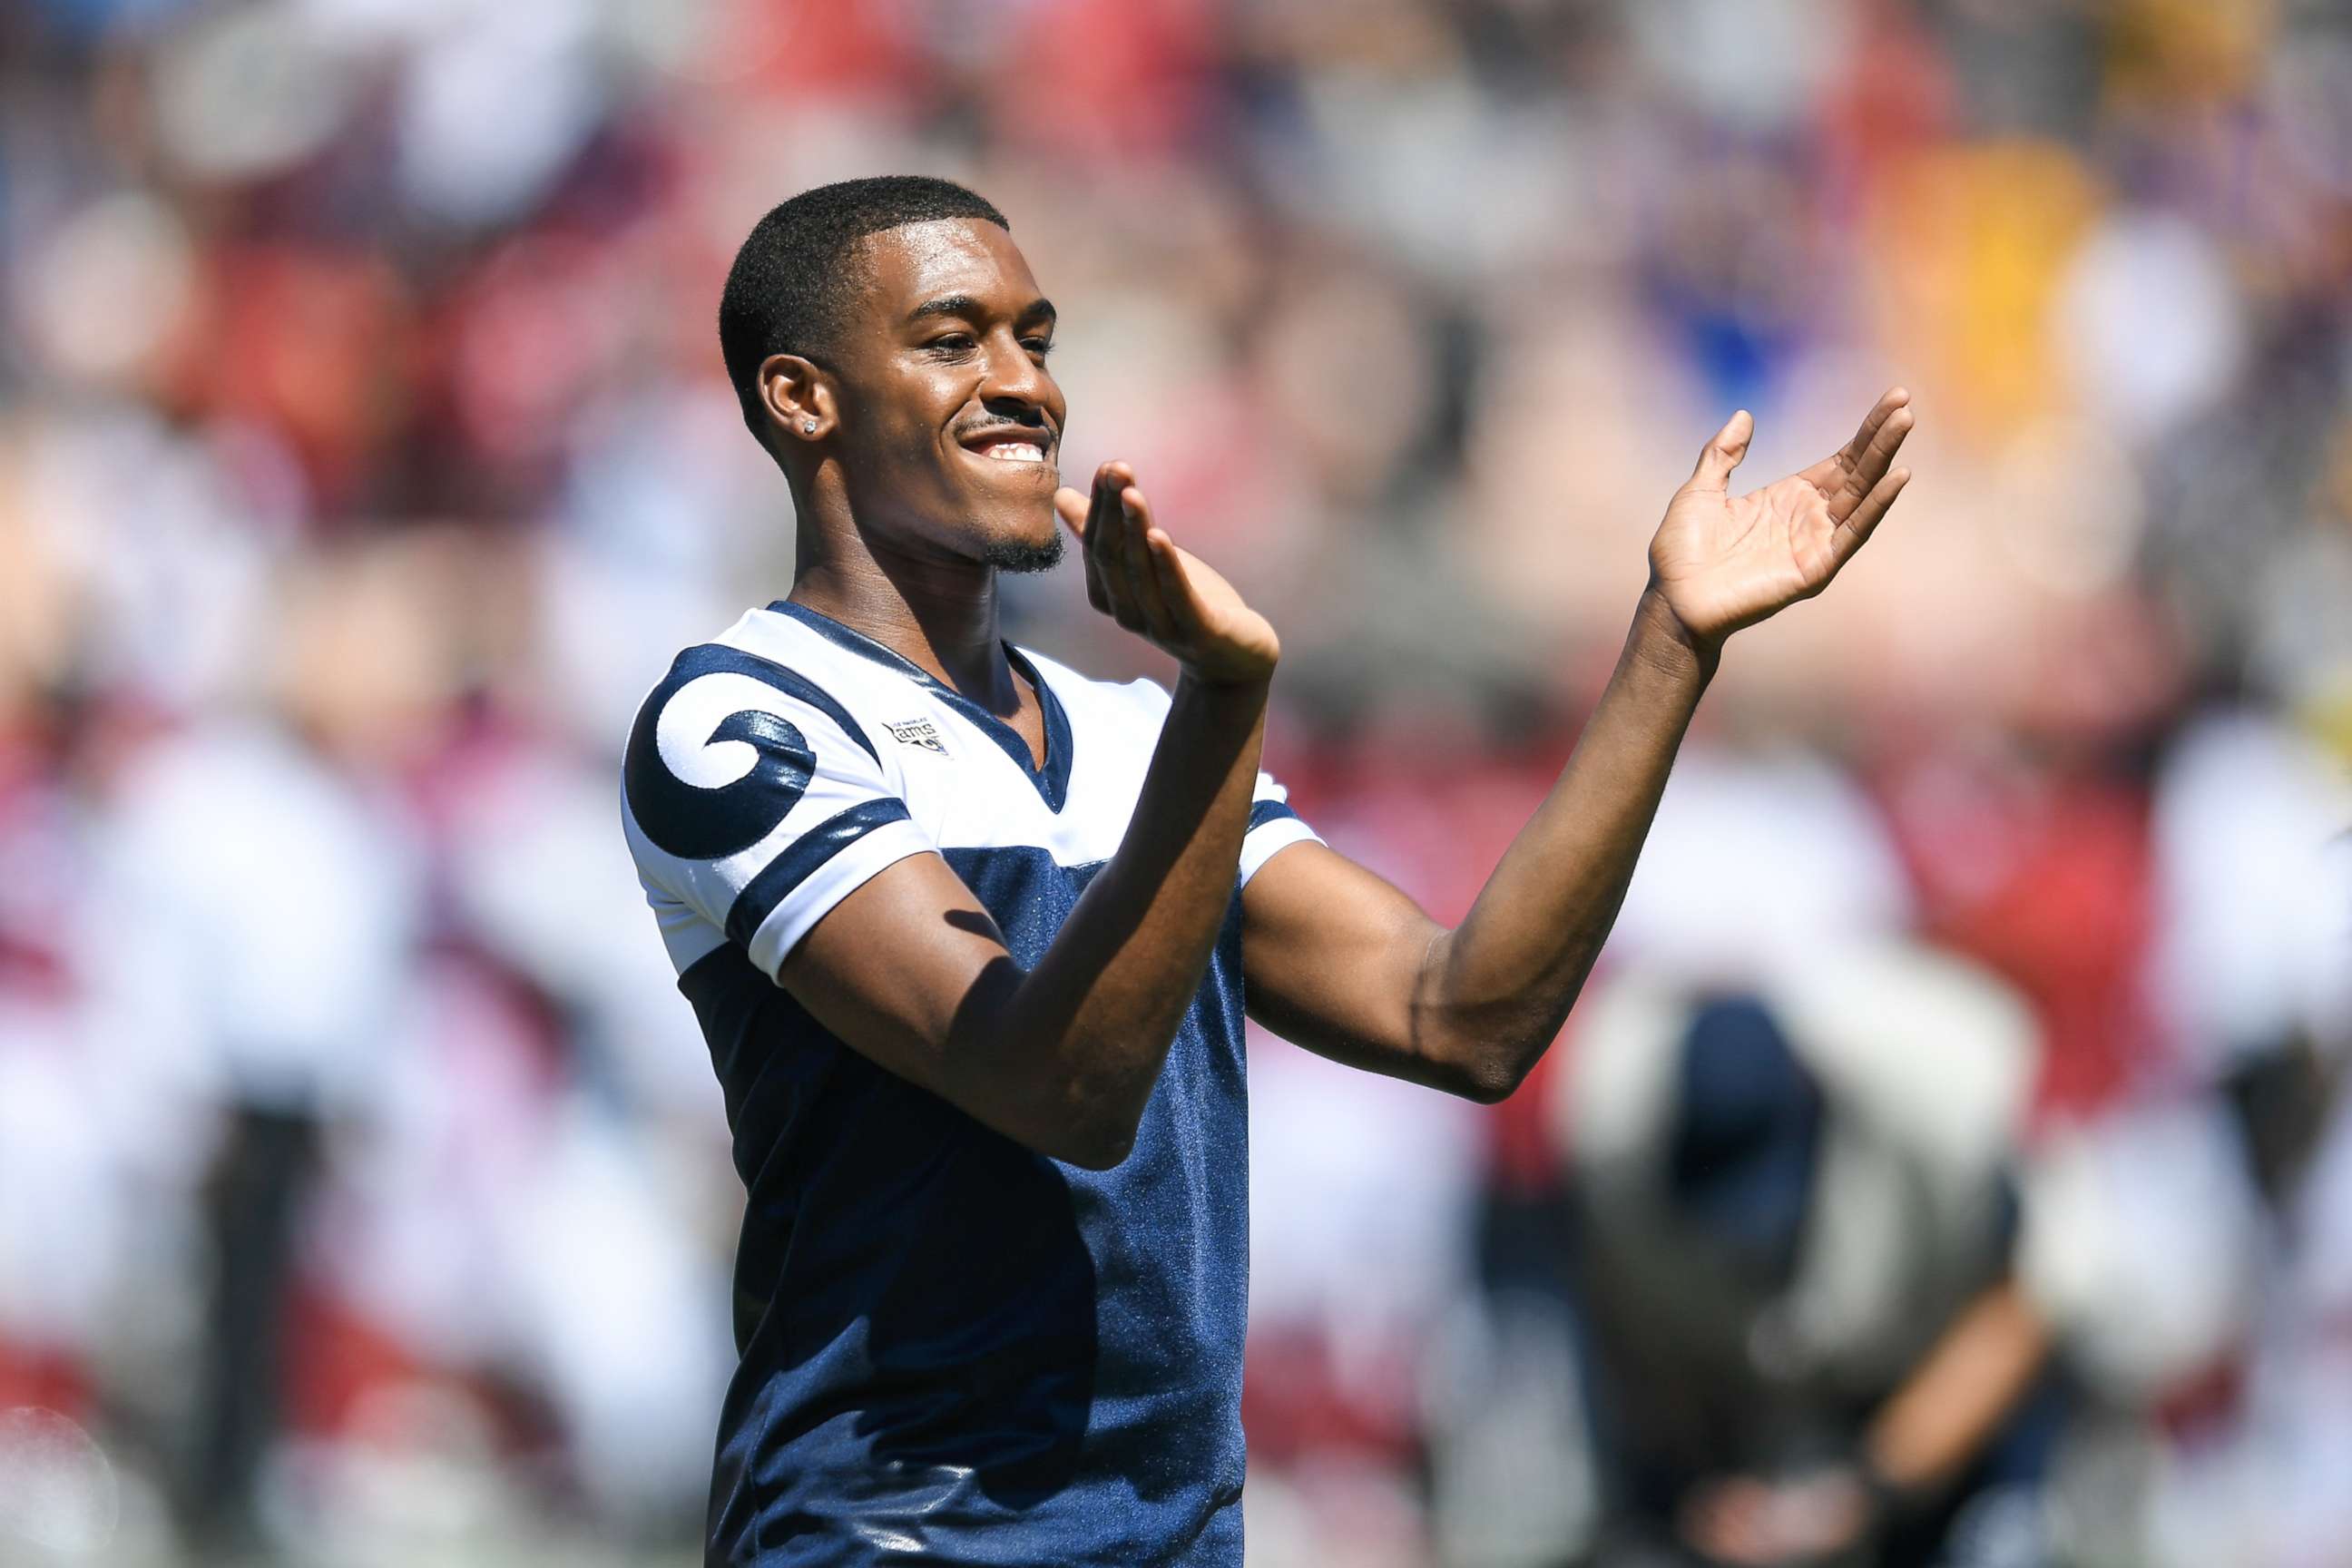 PHOTO: Los Angeles Rams cheerleader Quinton Peron, one of the first male NFL cheerleaders, cheers ahead of the game against the Arizona Cardinals at Los Angeles Memorial Coliseum, Sept. 16, 2018 in Los Angeles.